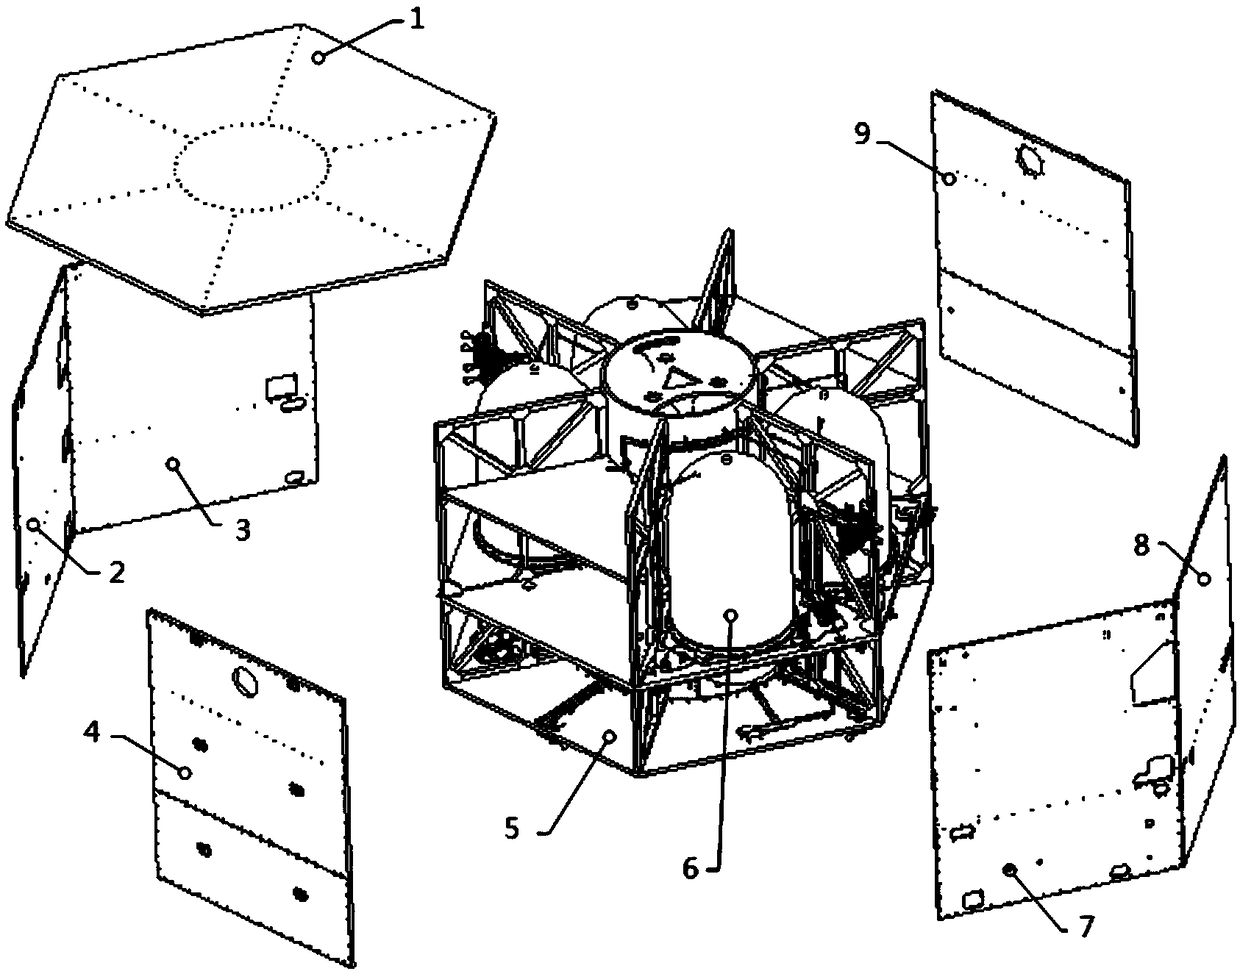 A high-orbit satellite assembly method based on bipropellant unified propulsion system